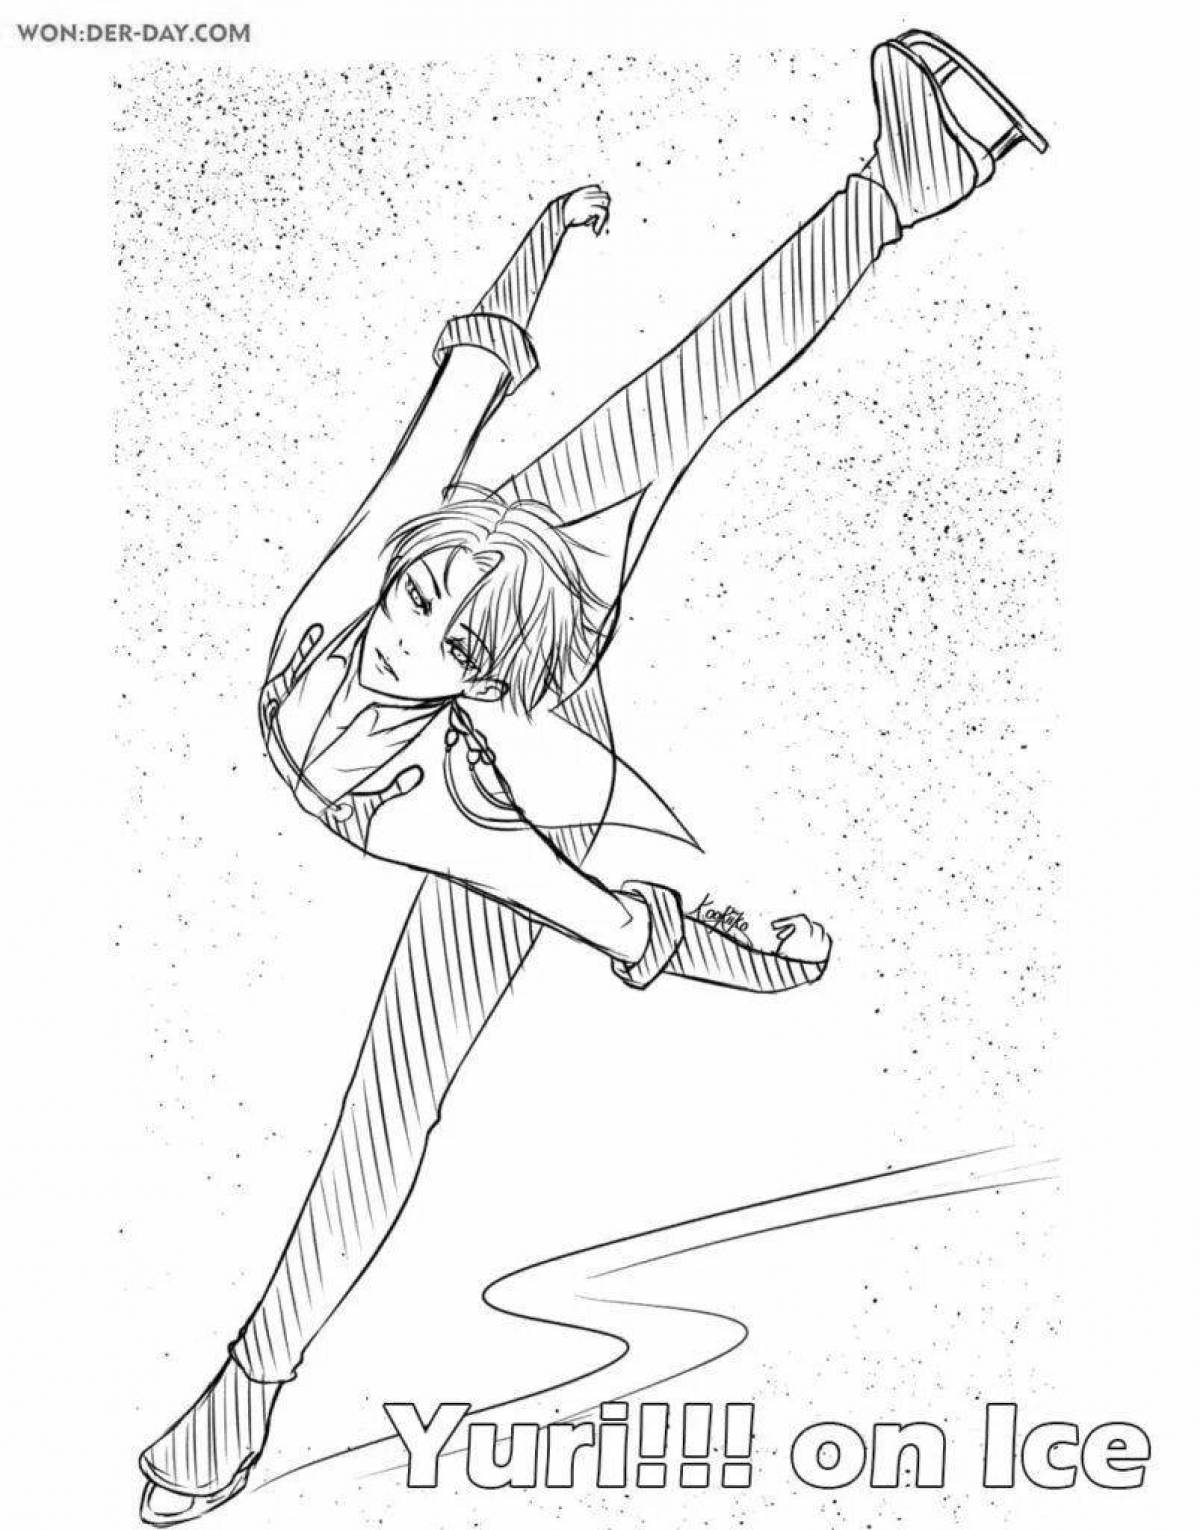 Coloring page charming yuri on ice